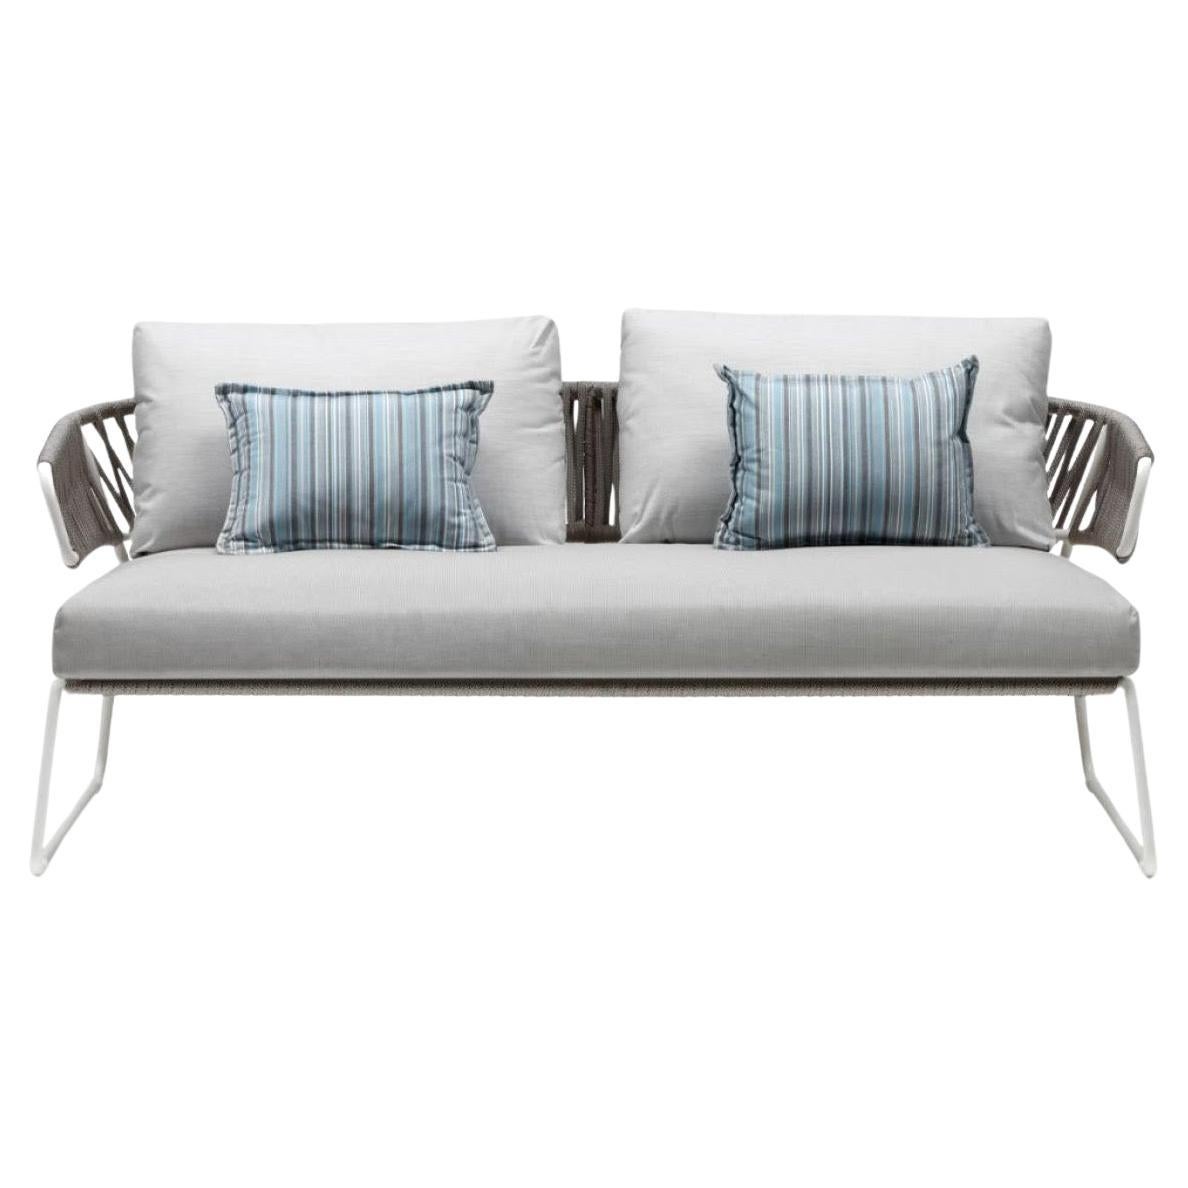 Modern Grey Outdoor or Indoor Sofa in Metal and Cord, 21 Century For Sale